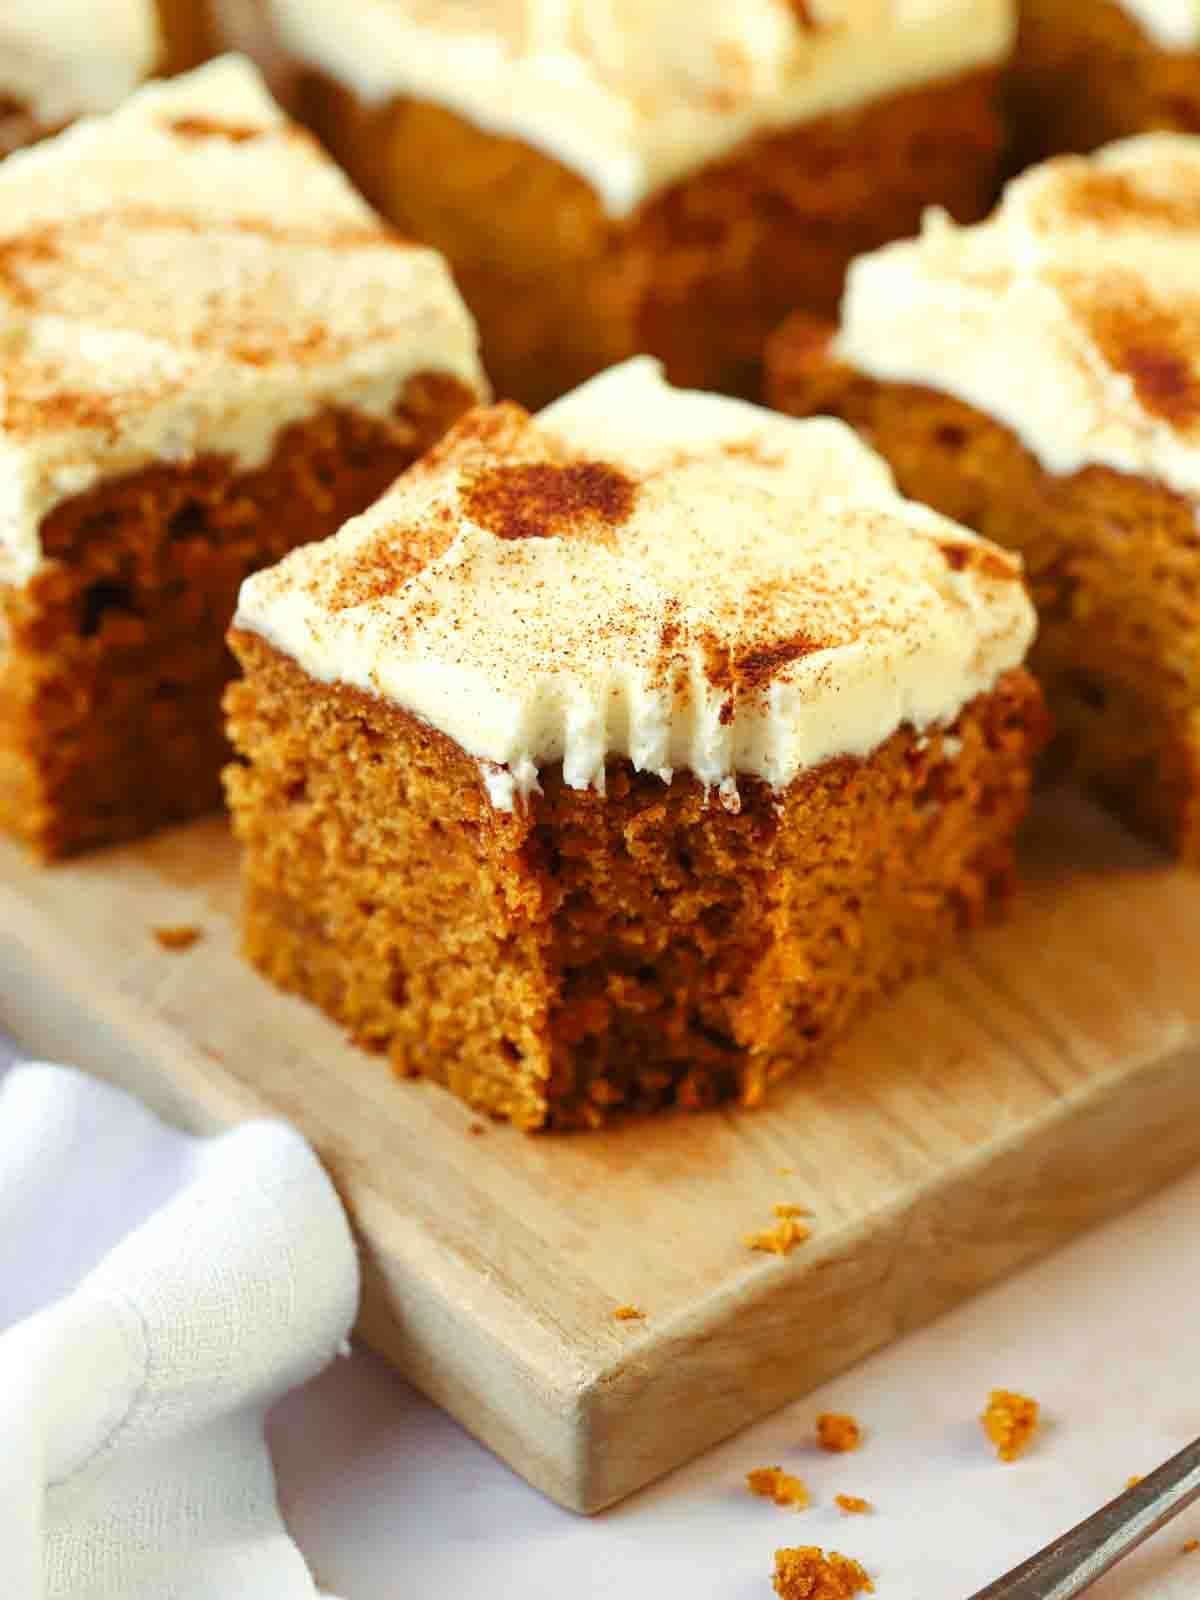 A small bit taken out of the corner of a square of pumpkin cake with cream cheese frosting on top. Other squares in the background on a board.